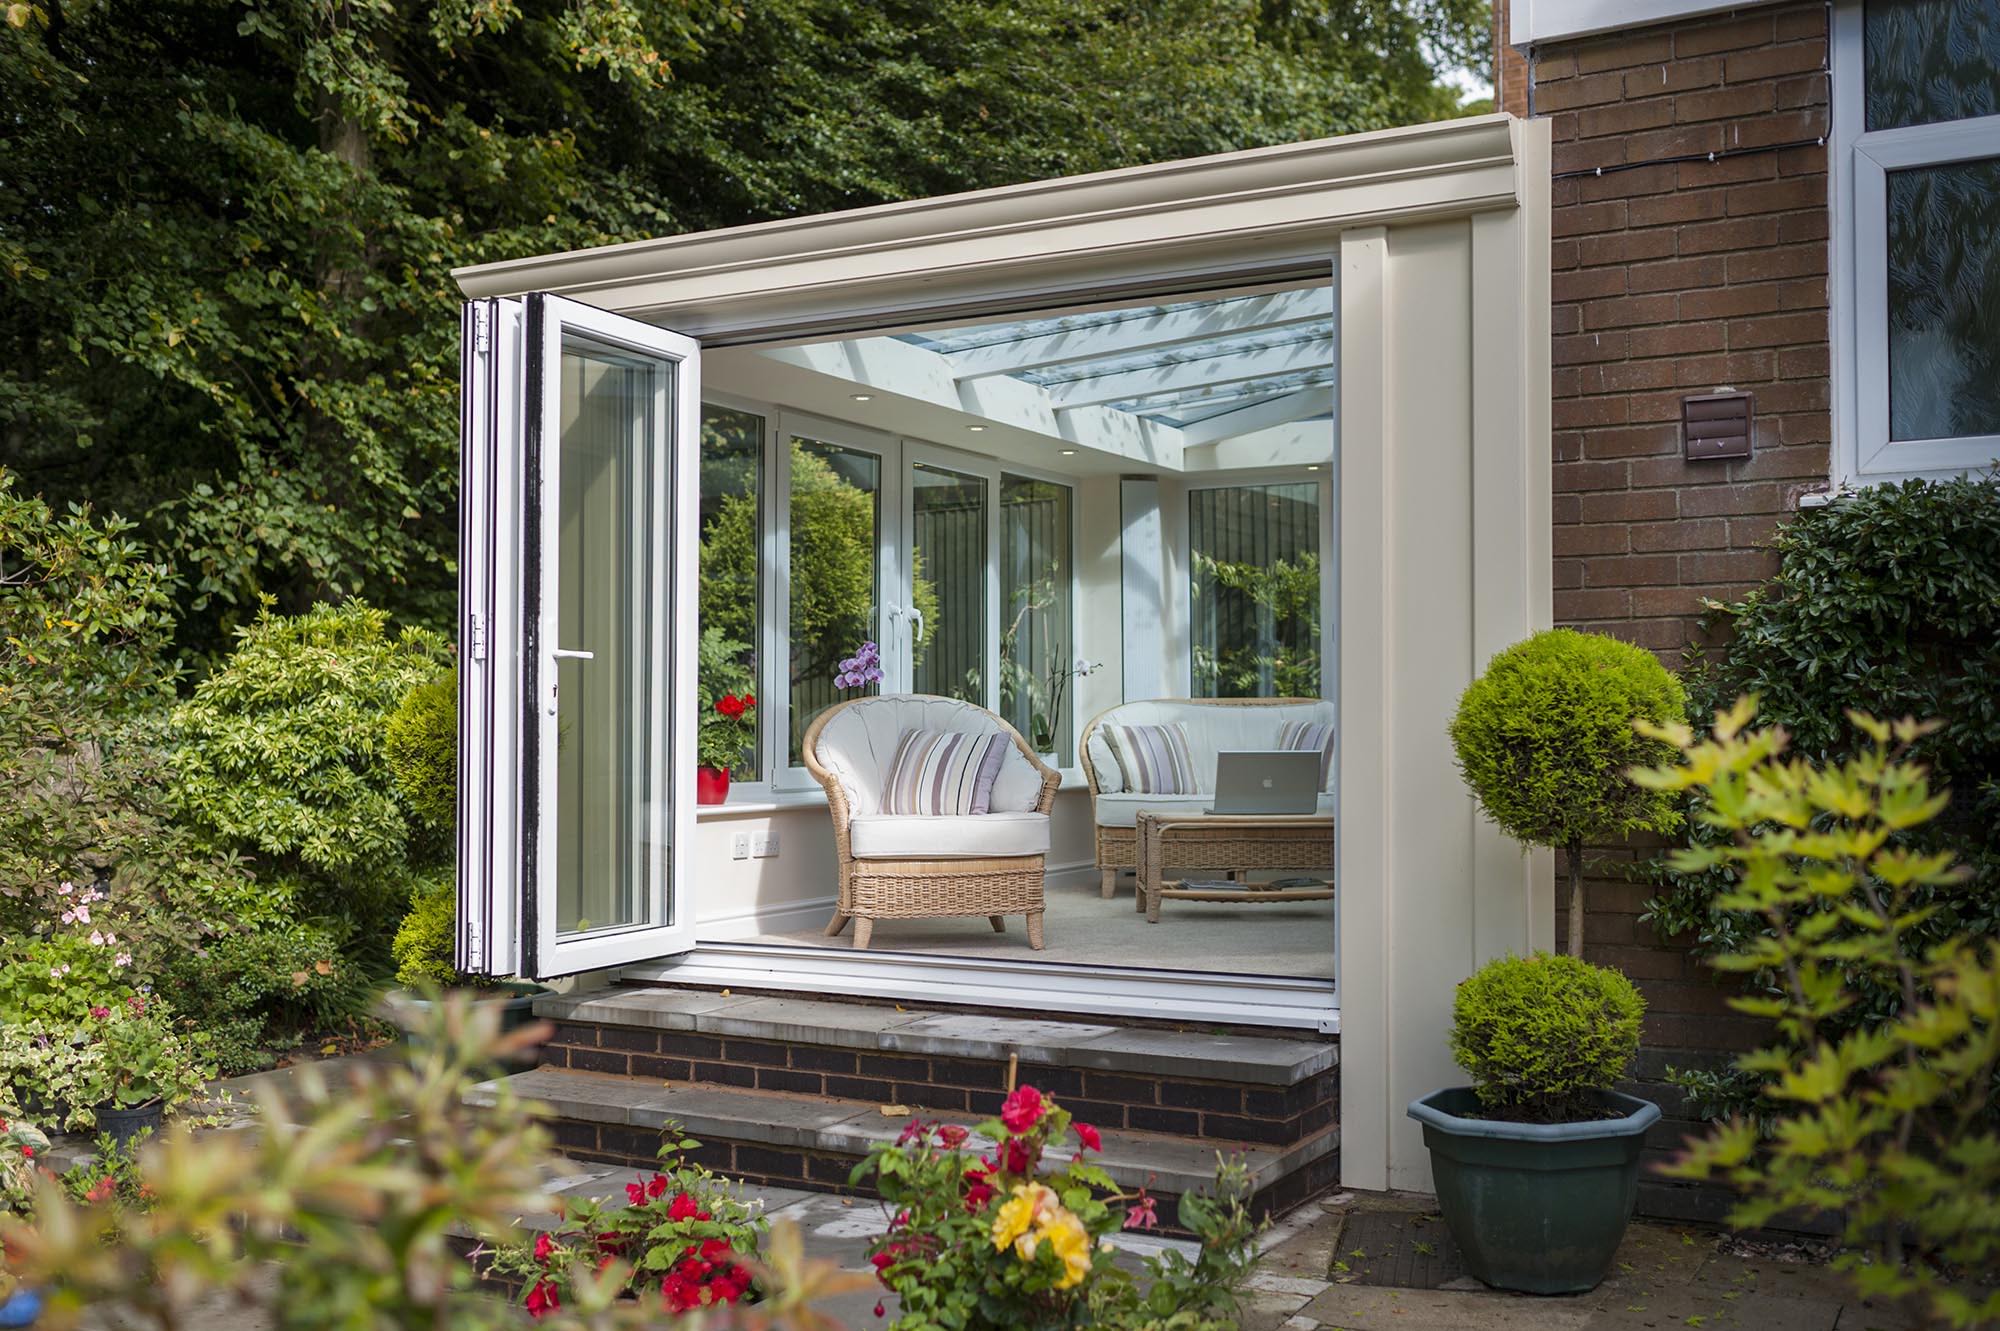 Flat roofed conservatory with open alumium doors